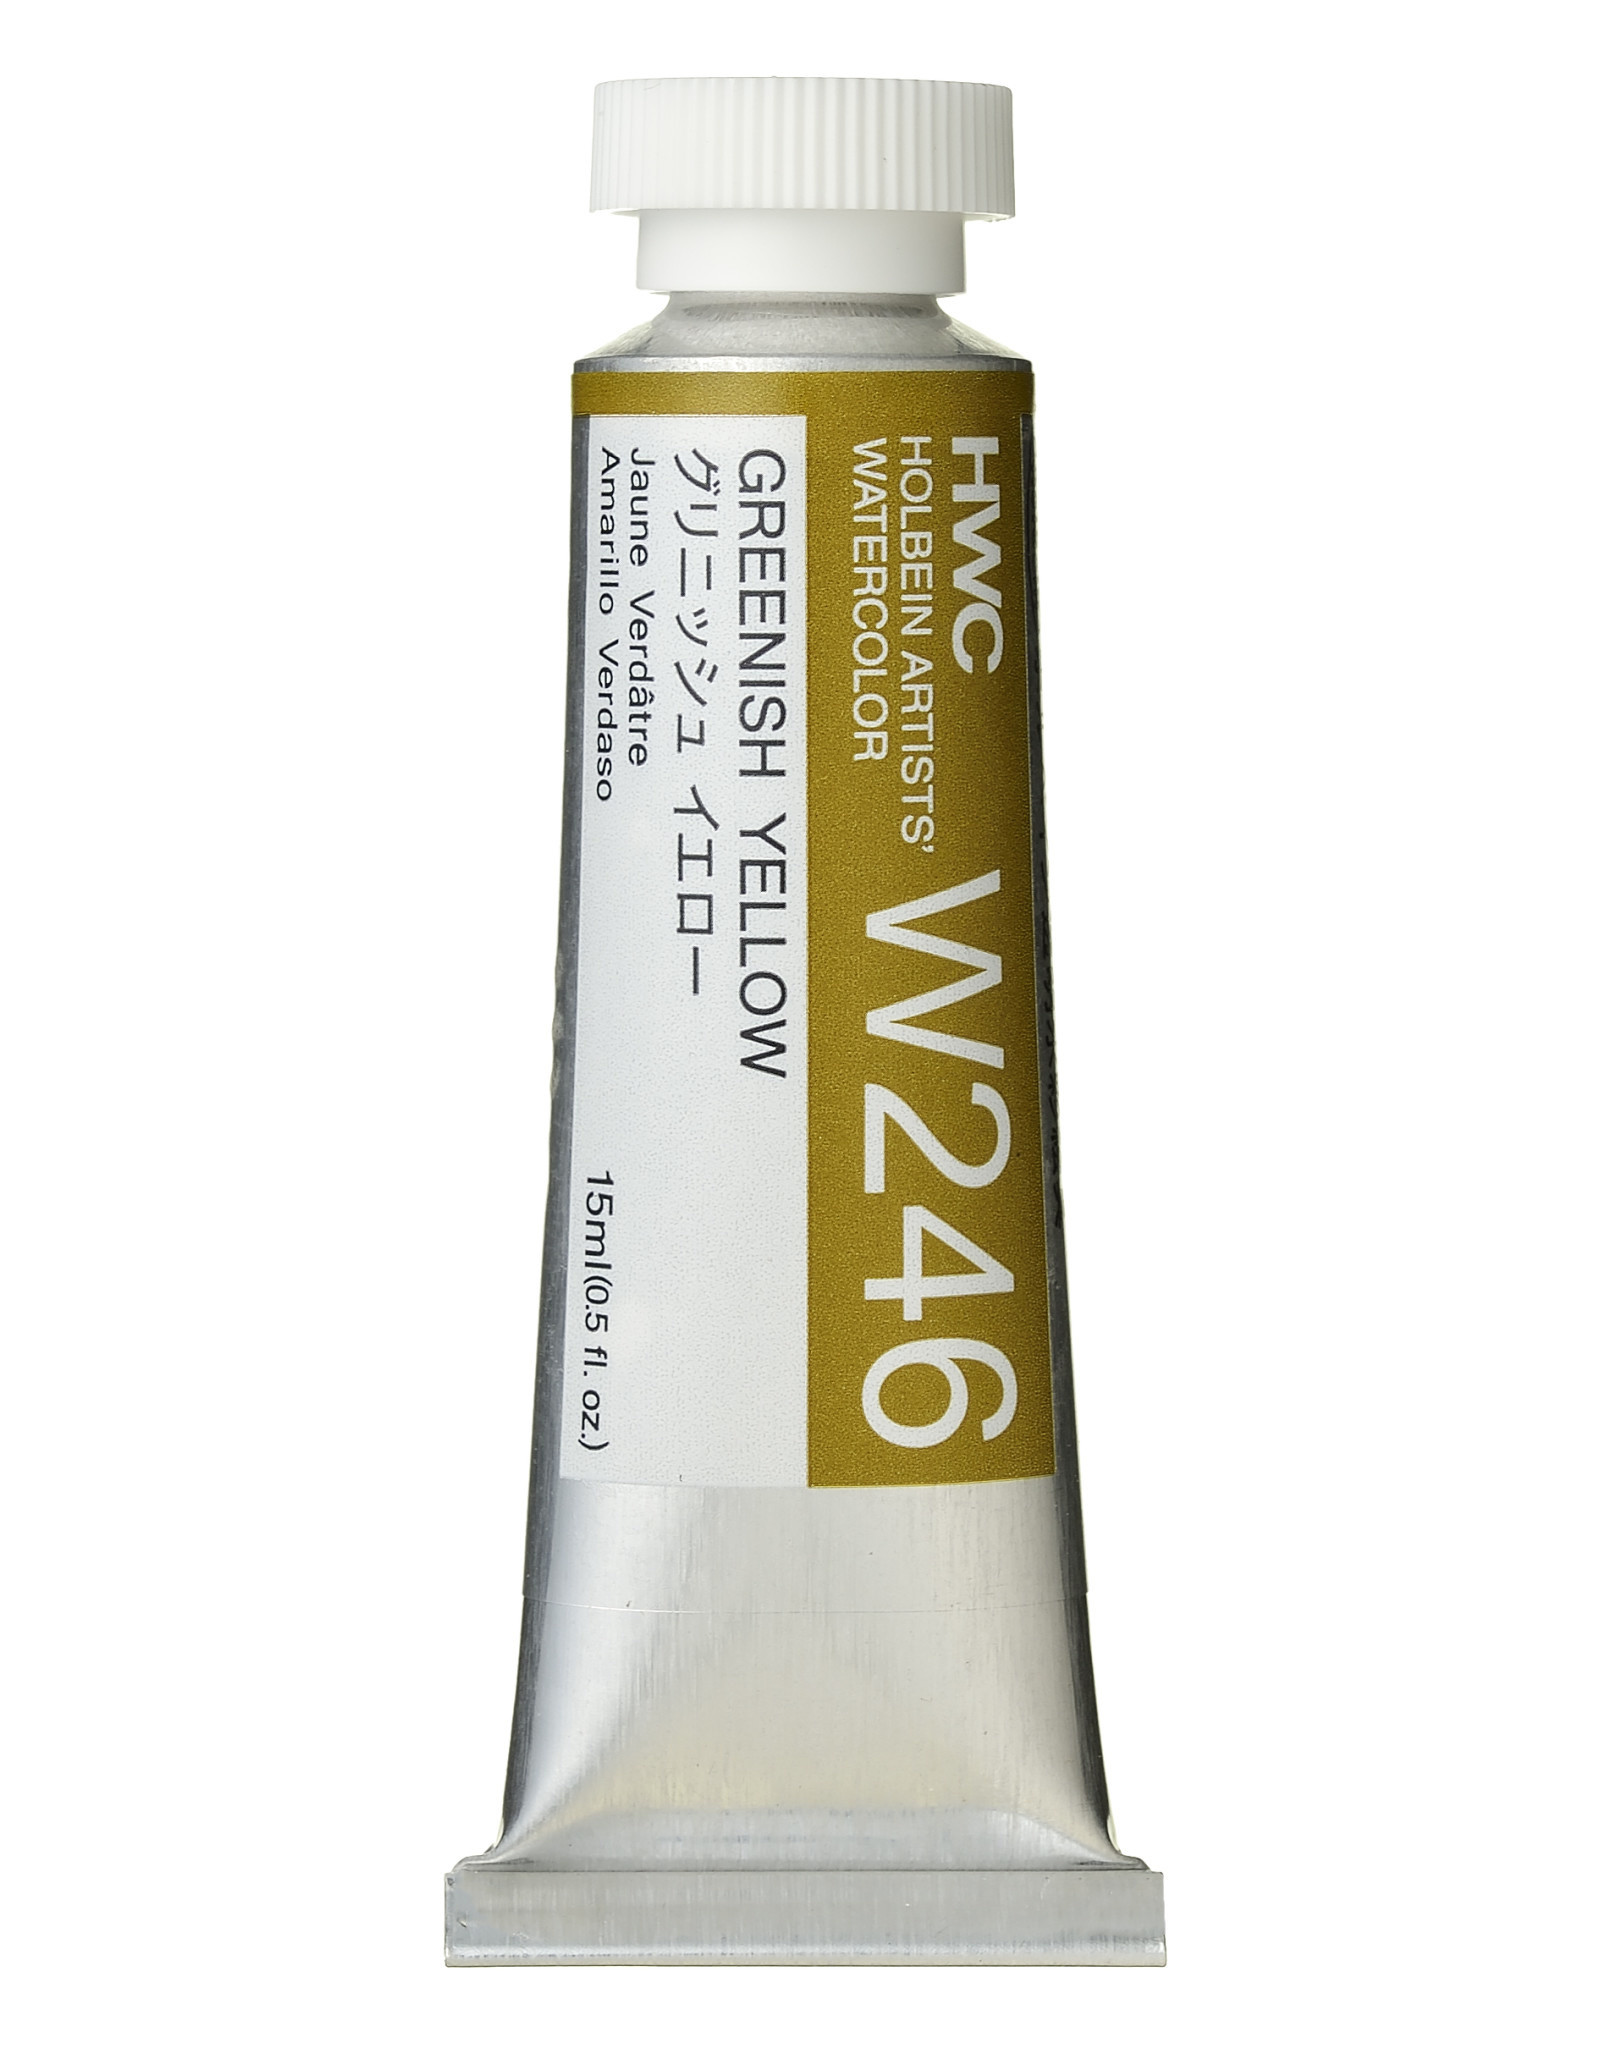 HOLBEIN Holbein Artist’s Watercolor, Greenish Yellow 15ml